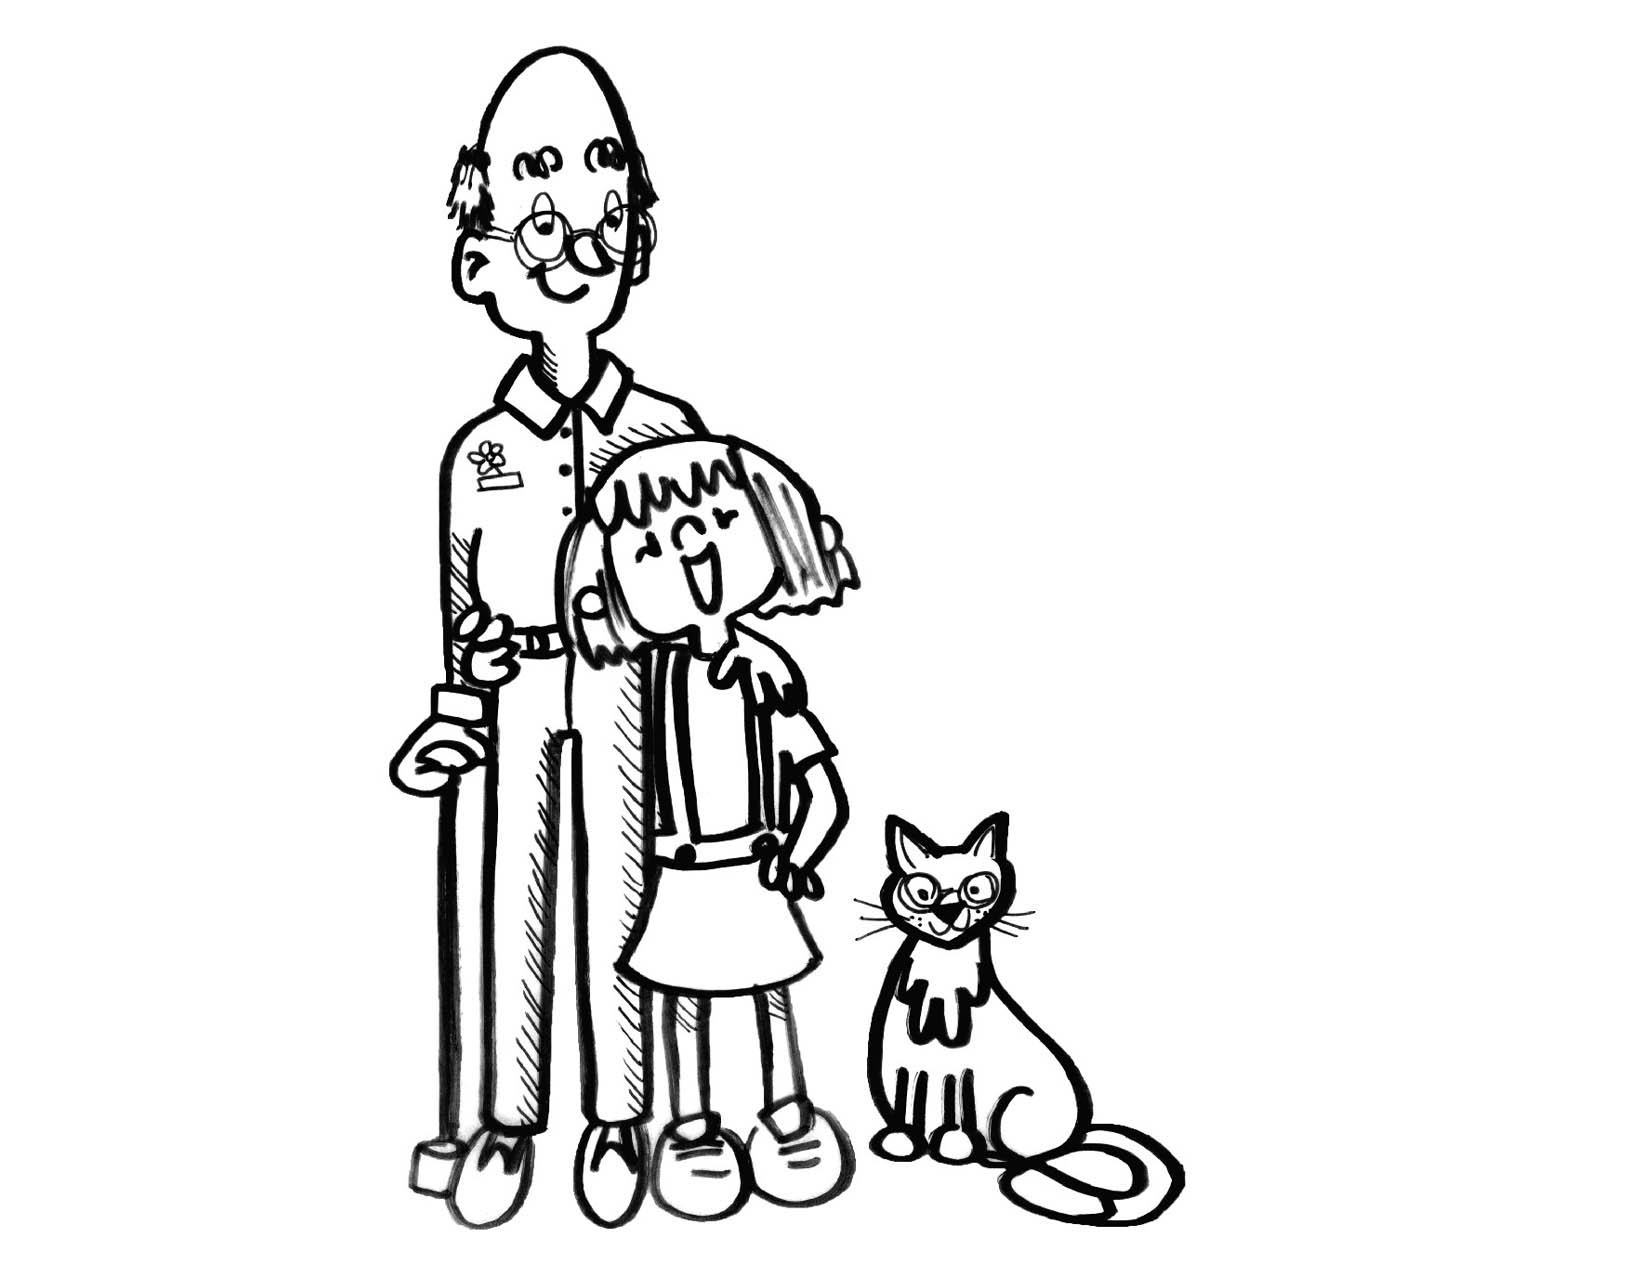 Coloring page of a girl, her cat, and her grandfather